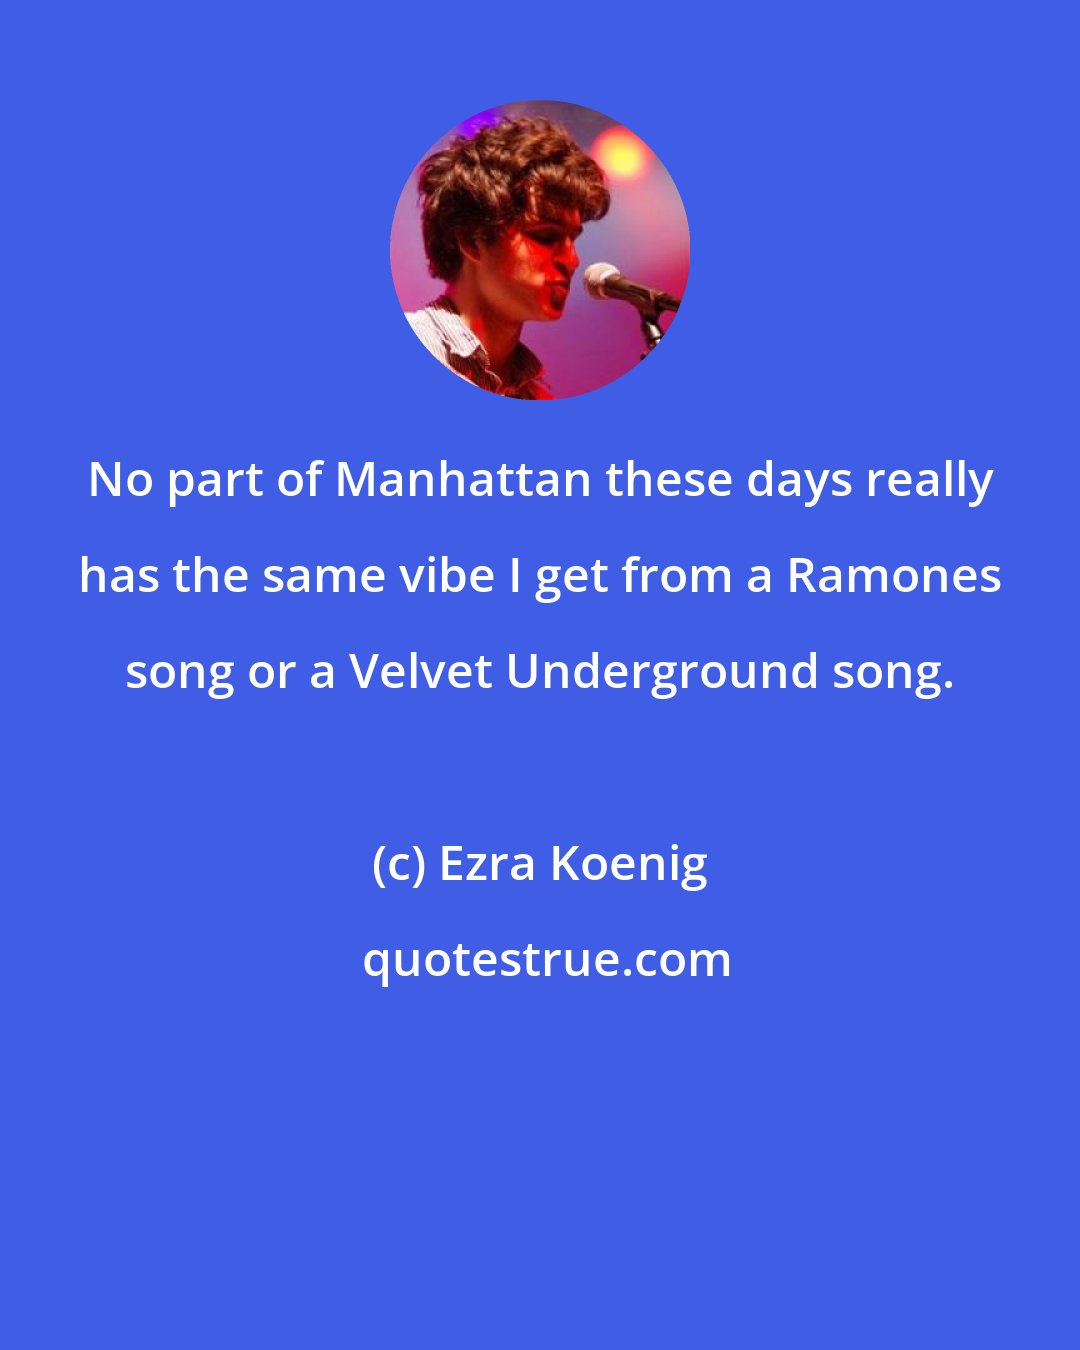 Ezra Koenig: No part of Manhattan these days really has the same vibe I get from a Ramones song or a Velvet Underground song.